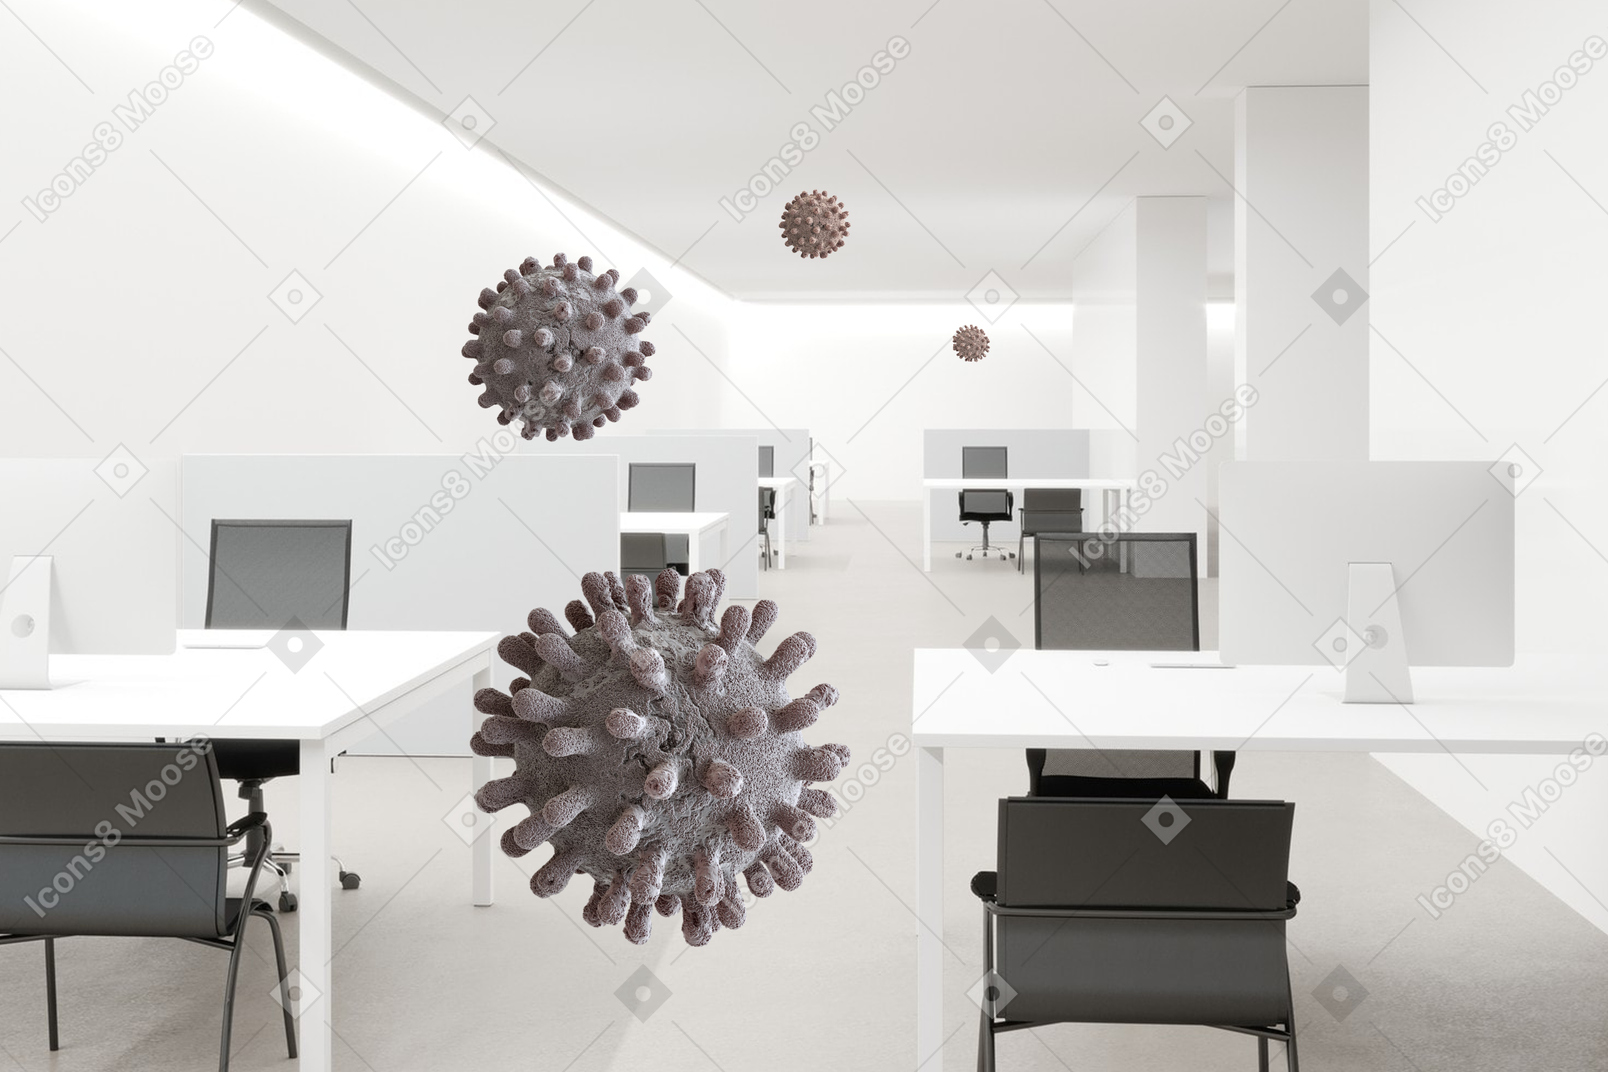 3d rendering of an office